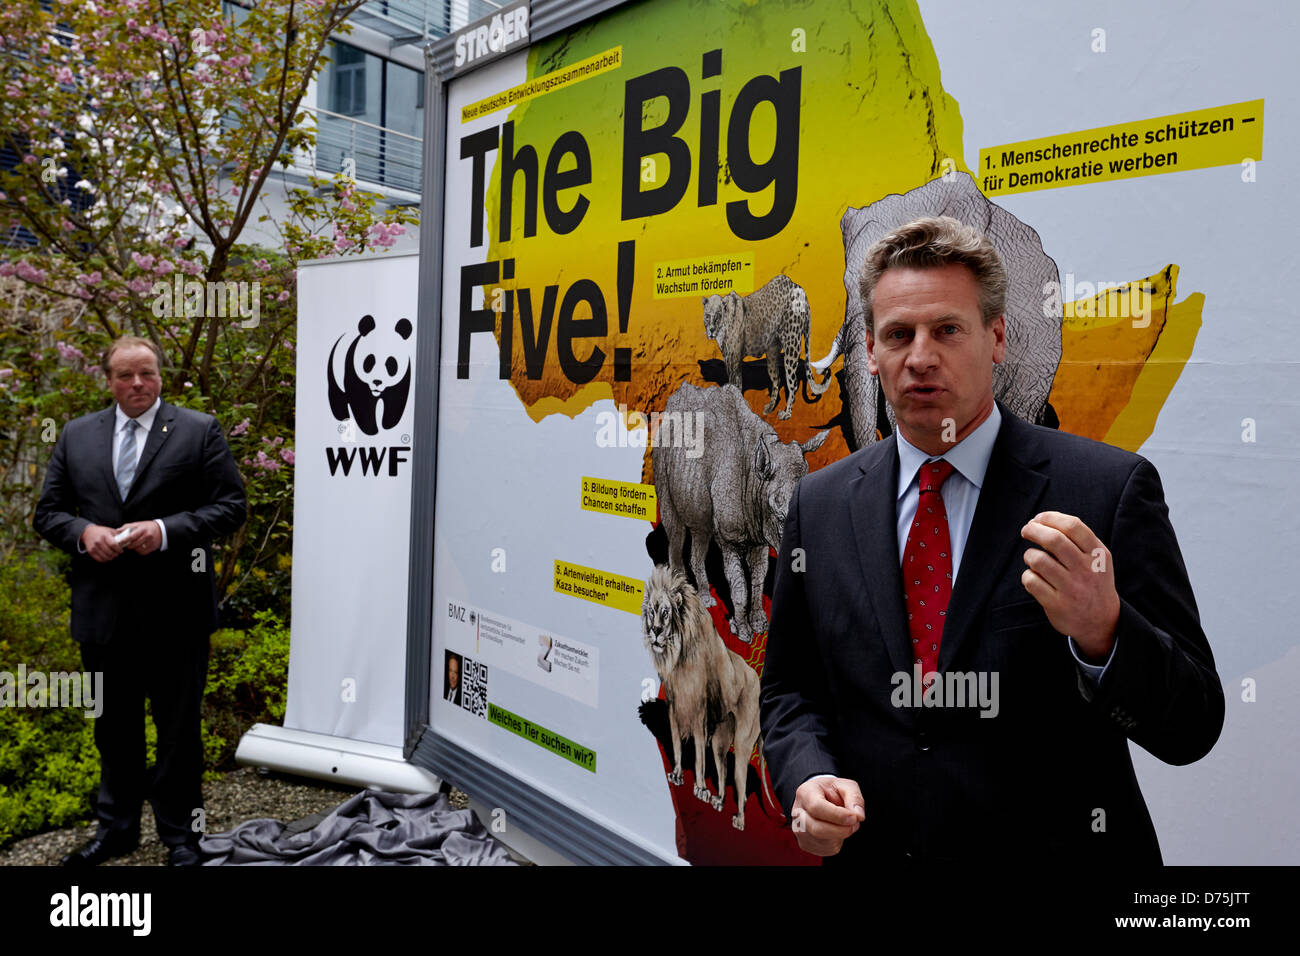 Berlin, 29 April 2013. Start of the national campaign 'The Big Five' with Dirk Niebel. Dirk Niebel, Federal Minister for Economic Cooperation and Development and Eberhard Brandes, CEO of WWF Germany, present the new nationwide poster campaign 'The Big Five' of the Federal Ministry for Economic Cooperation and Development. / Eberhard Brandes, CEO of WWF Germany, holding a speech at the start campaign 'The Big Five' in Berlin. Credit:Reynaldo Chaib Paganelli/Alamy Live News Stock Photo